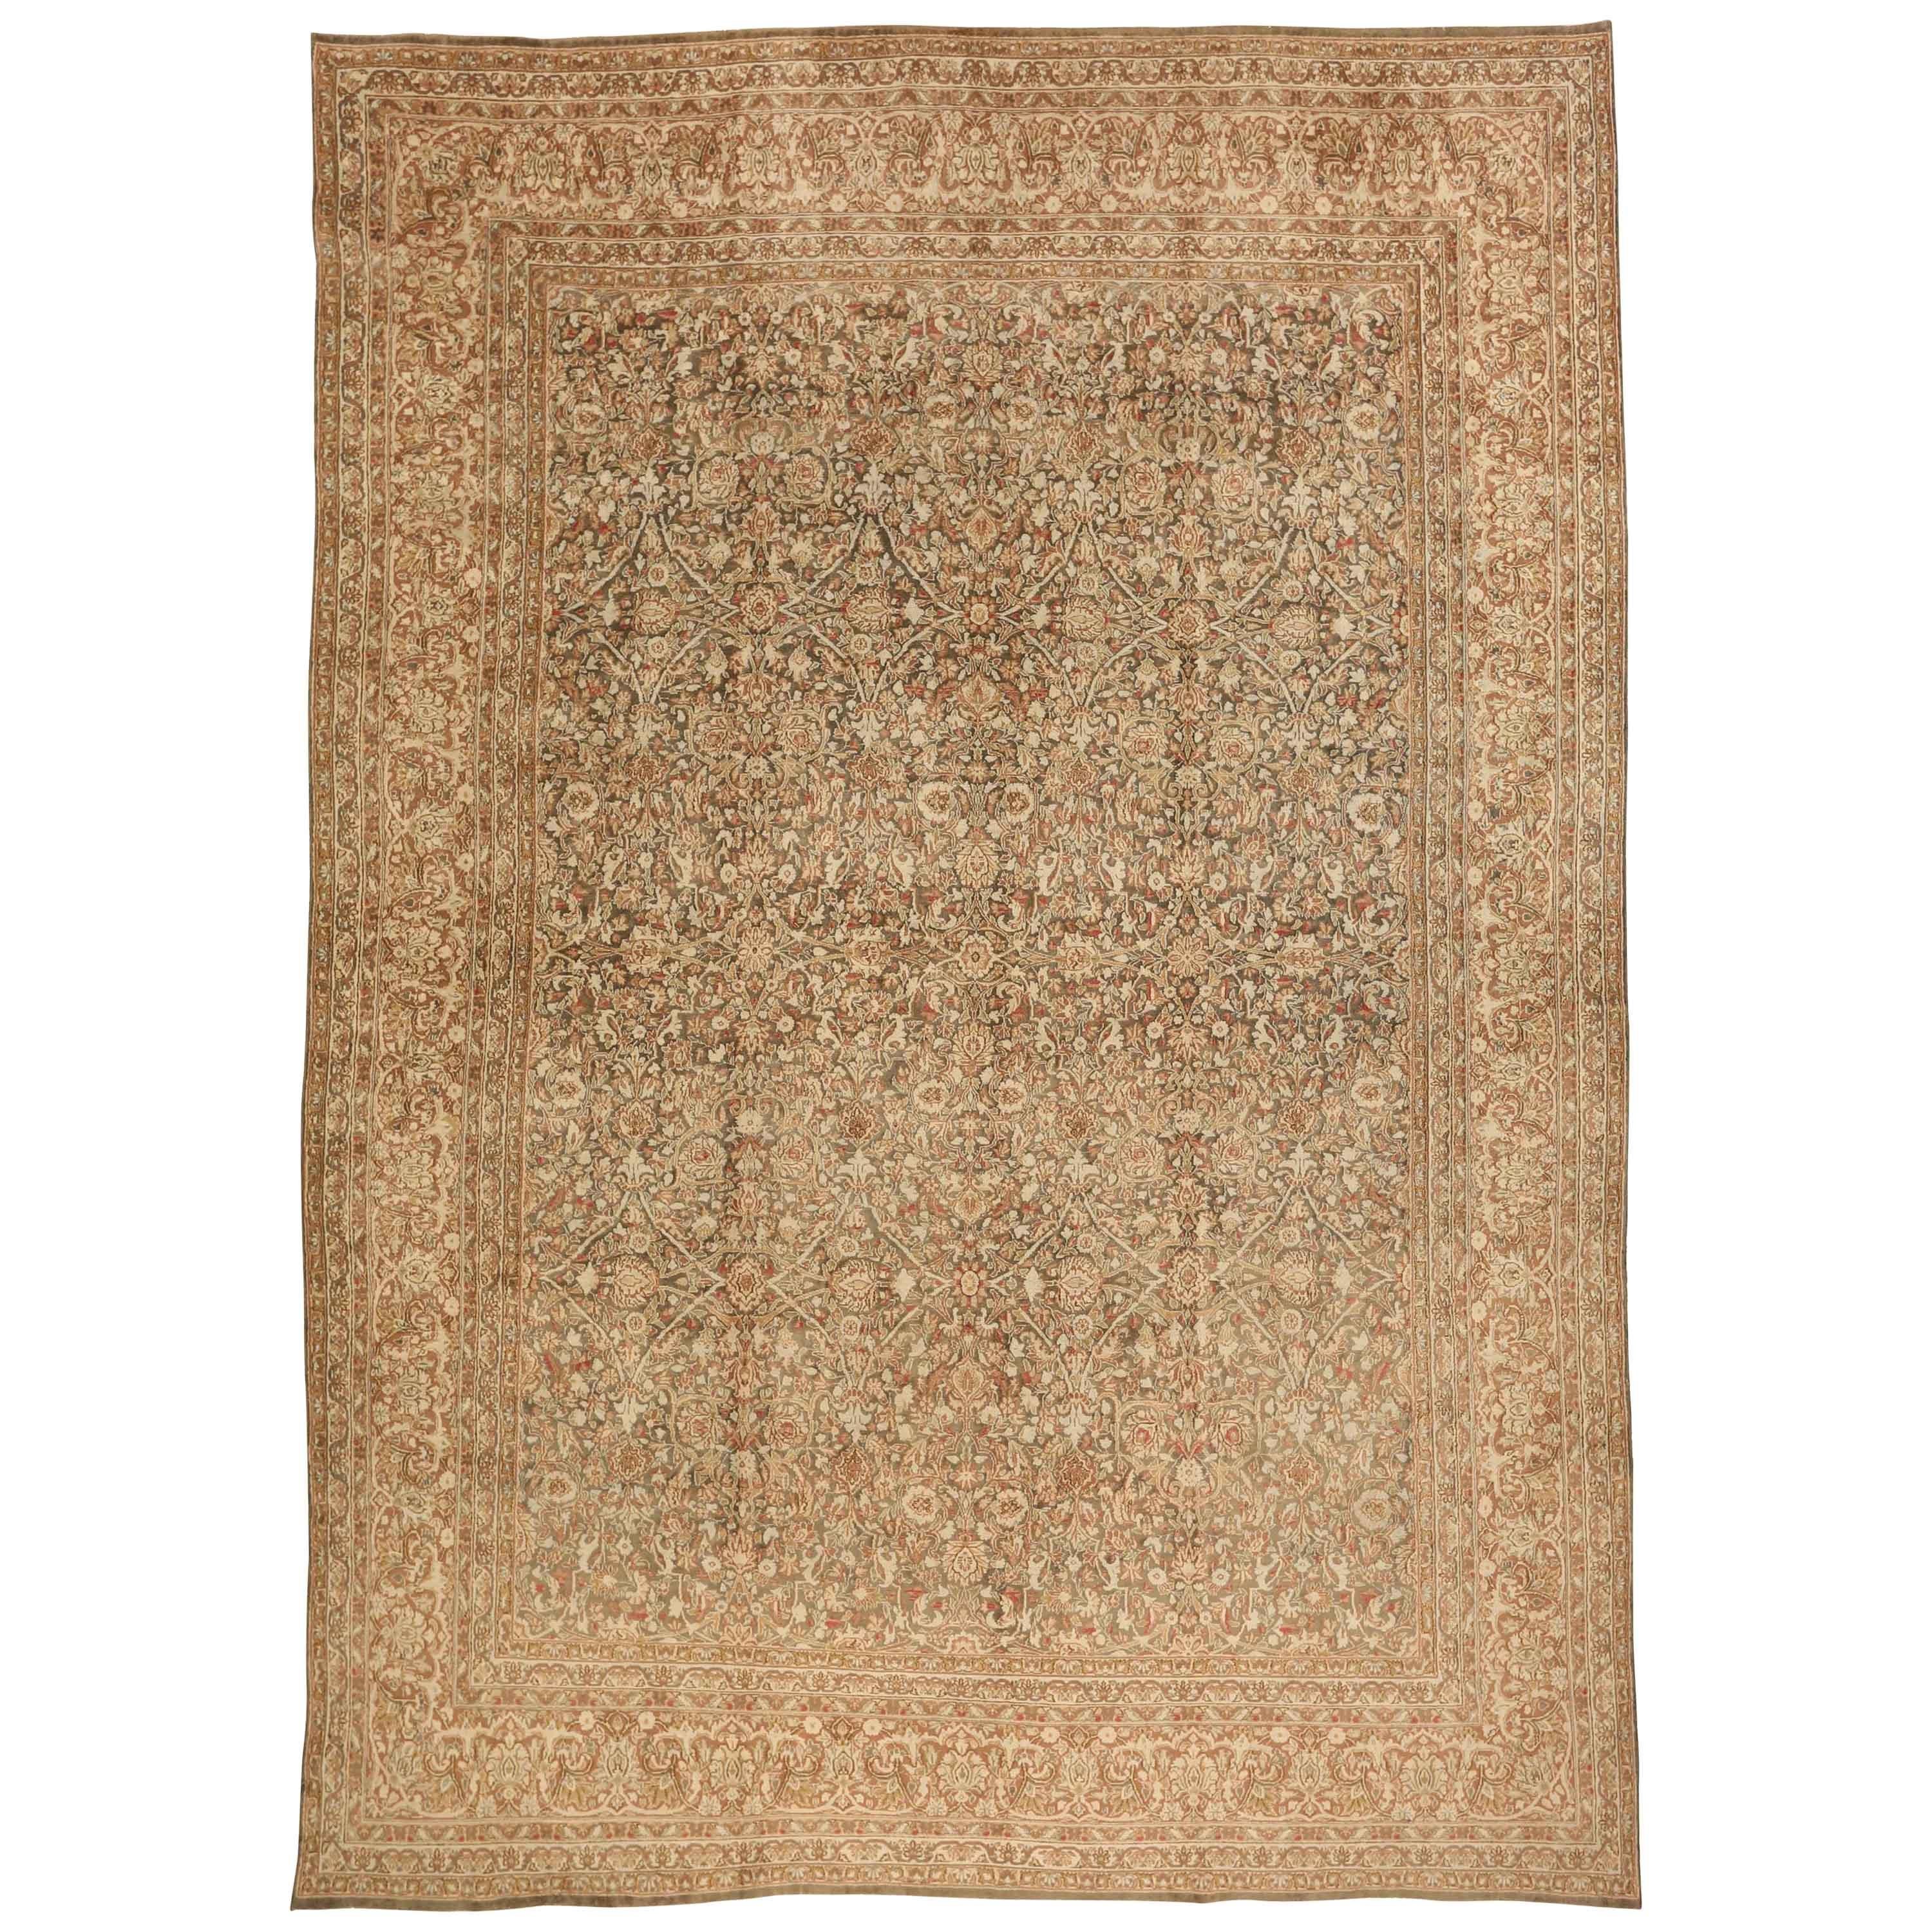 Antique Persian Kerman Rug with Rustic Flower Field Design, circa 1930s For Sale